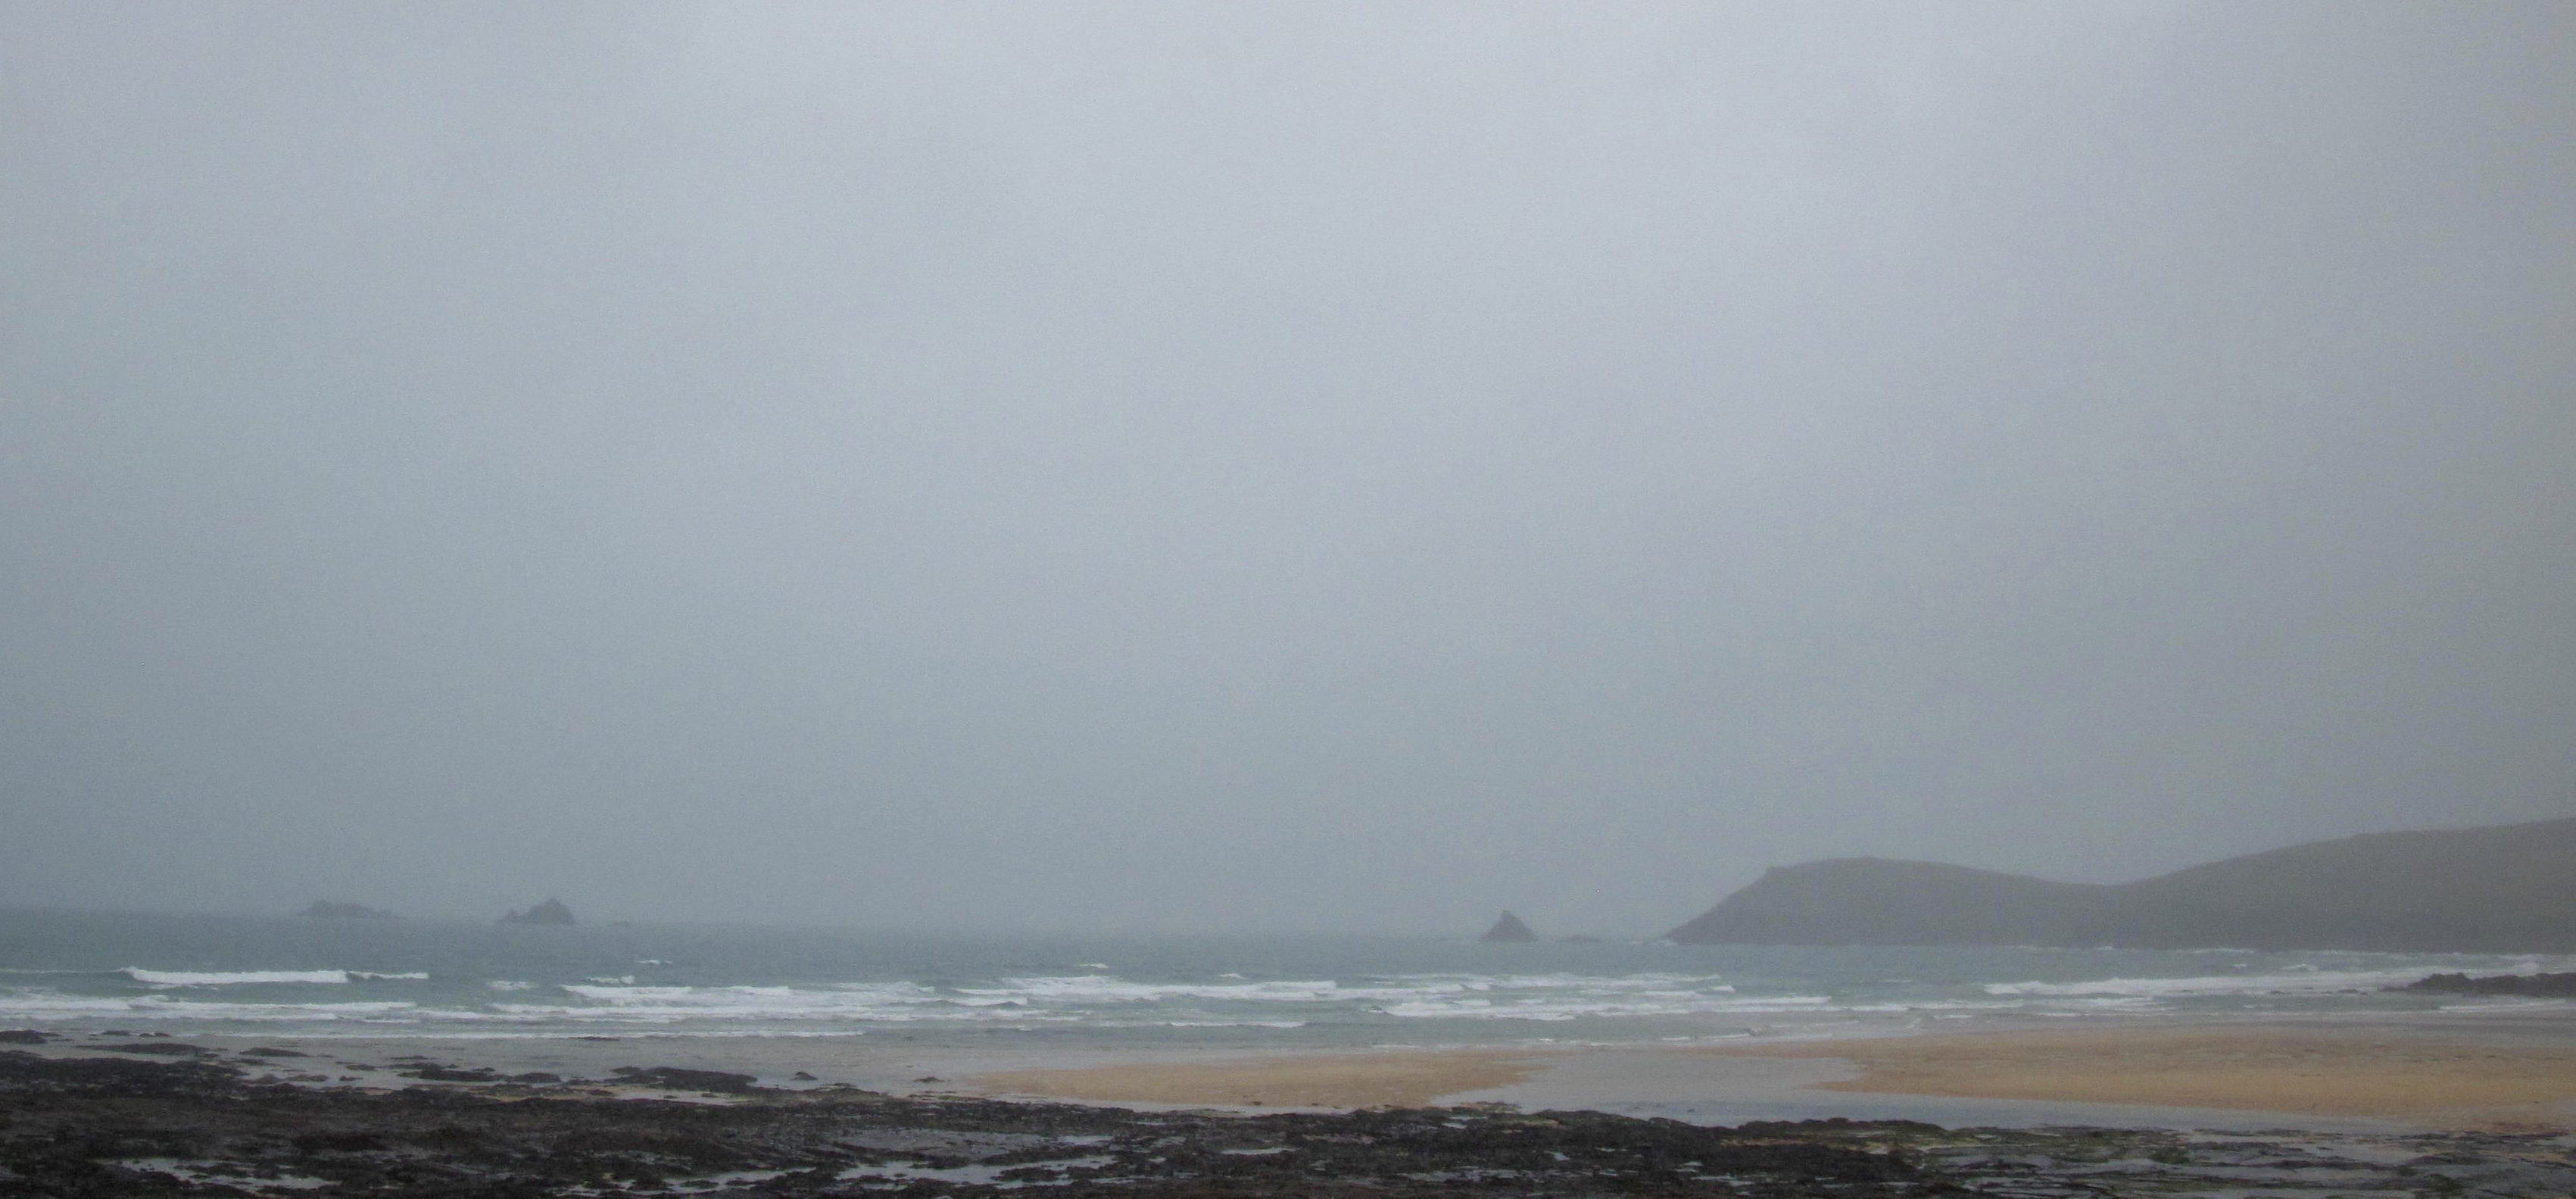 Surf Report for Friday 27th November 2015